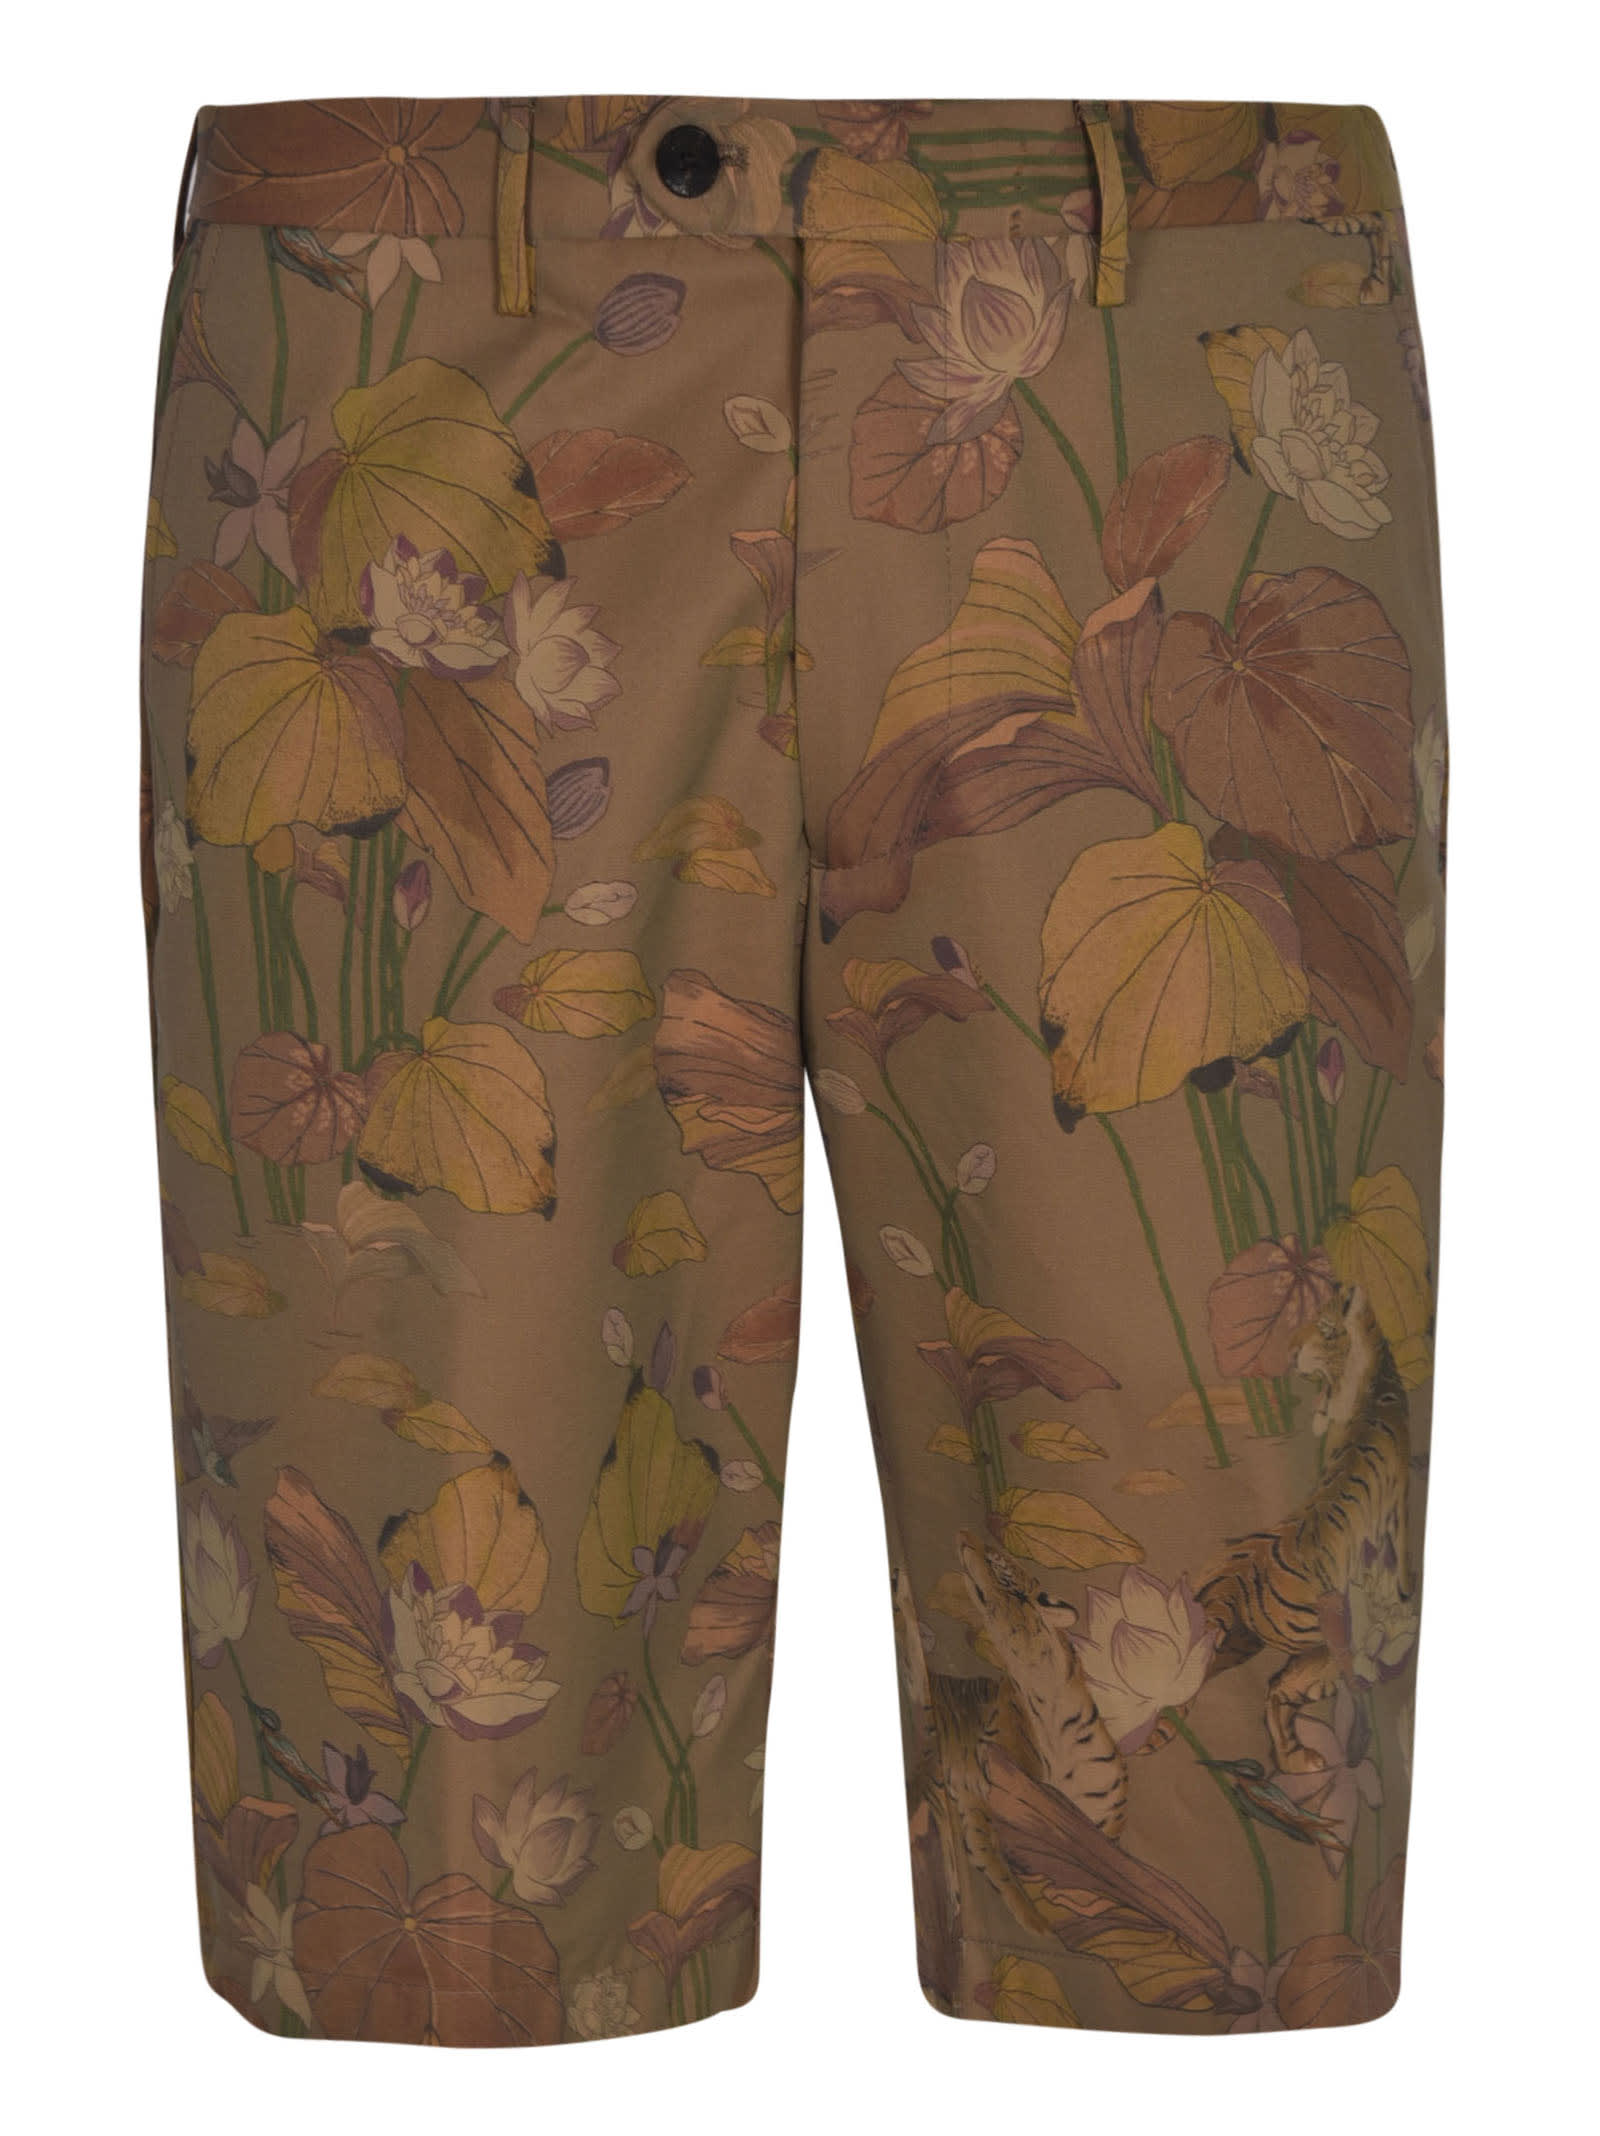 Etro Floral Printed Shorts